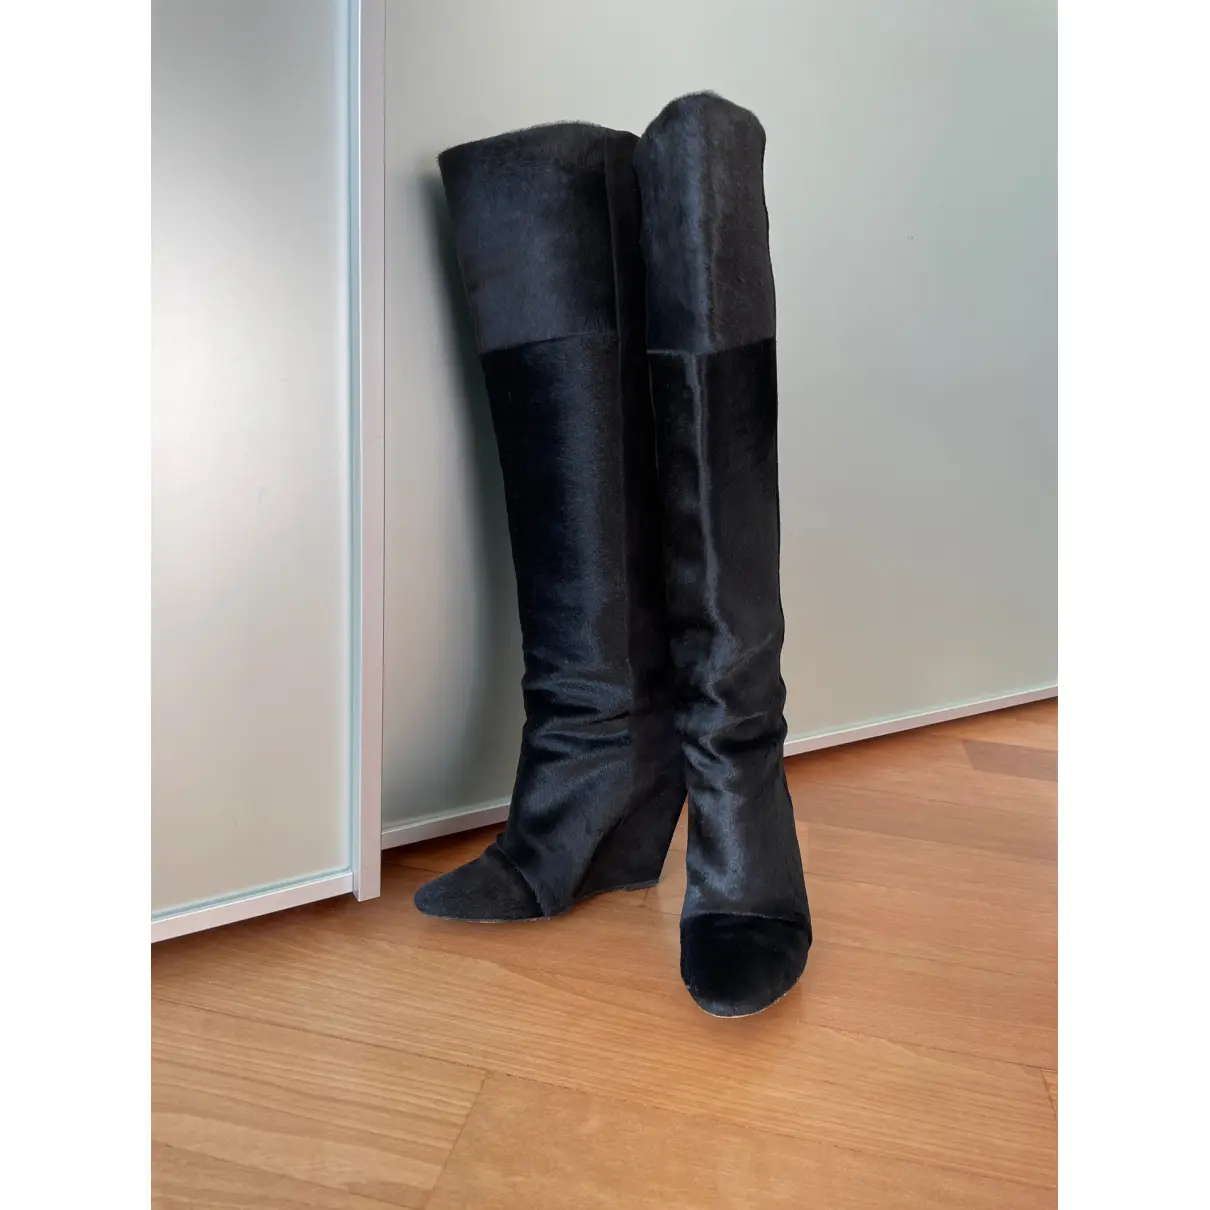 Buy Isabel Marant Pony-style calfskin boots online